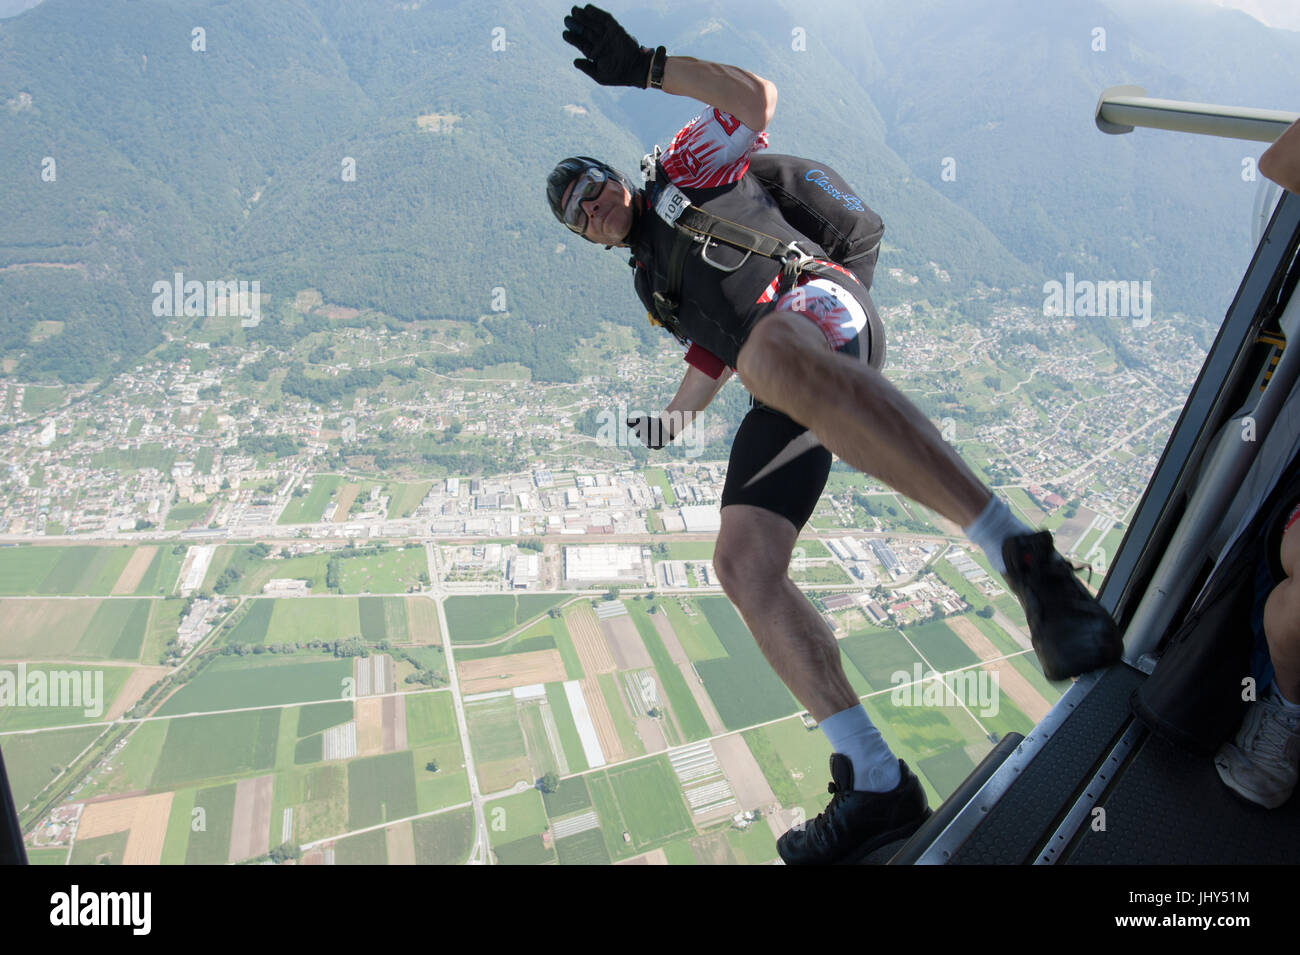 Skydiver enjoying the exit from the plane for an accuracy jump Stock Photo